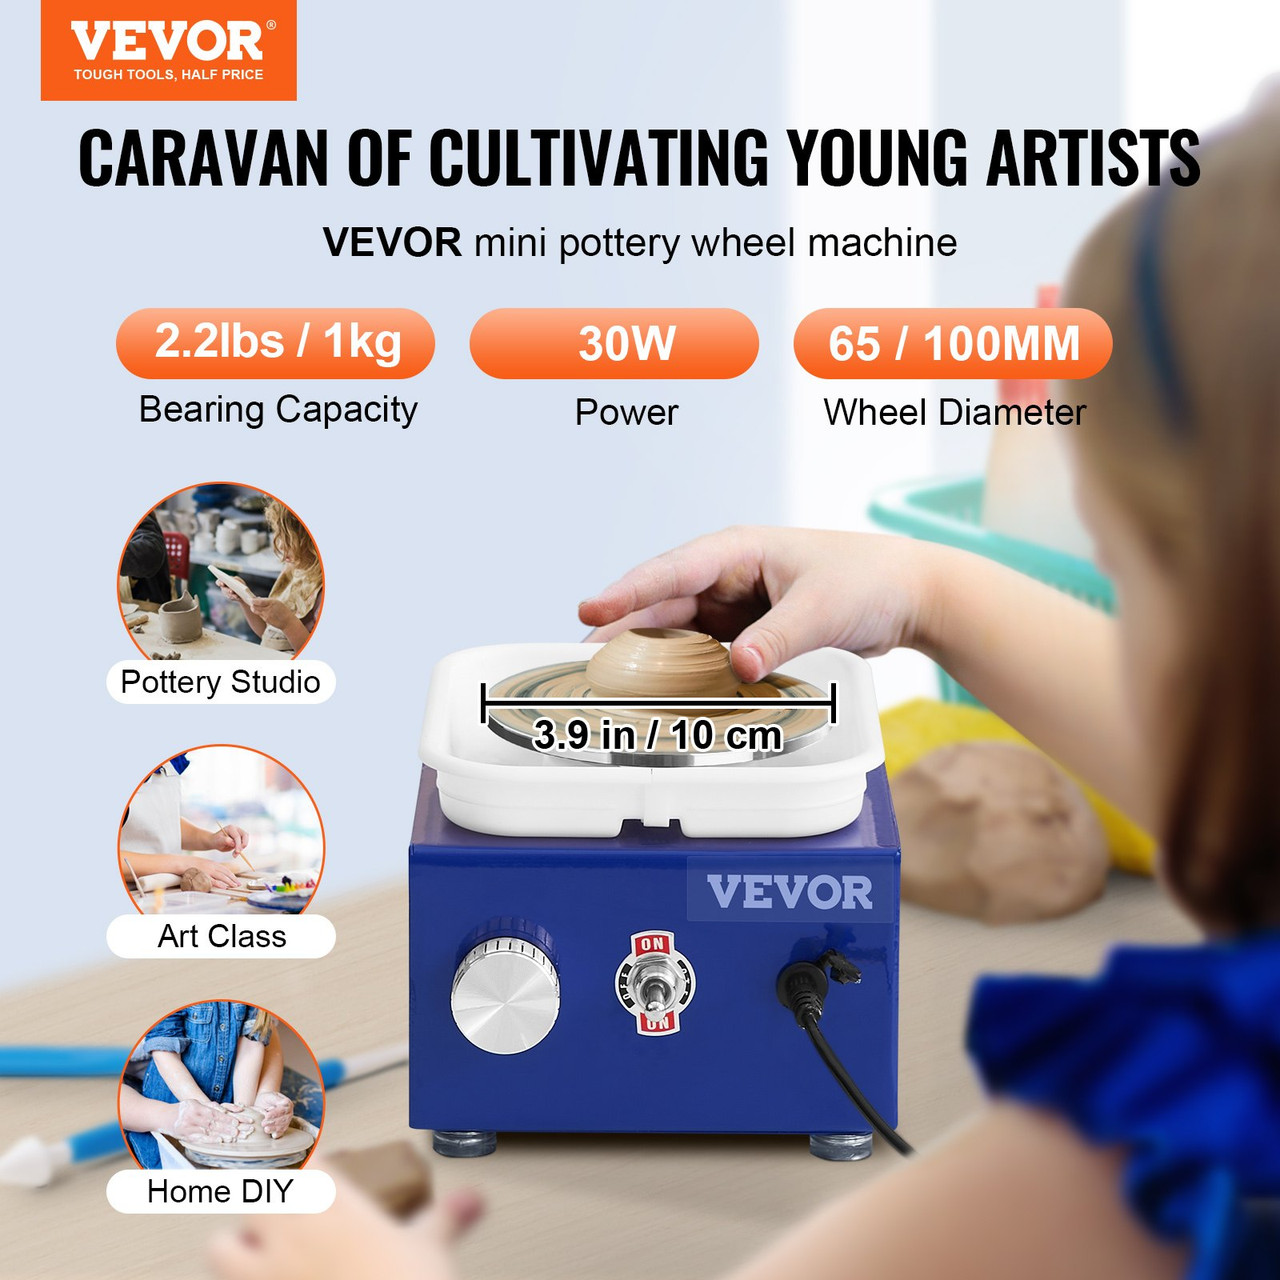 Mini Pottery Wheel, 2 Turntables 2.6in / 3.9in Ceramic Wheel Forming Machine, Adjustable 0-300RPM Speed ABS Detachable Basin, Sculpting Tools Apron